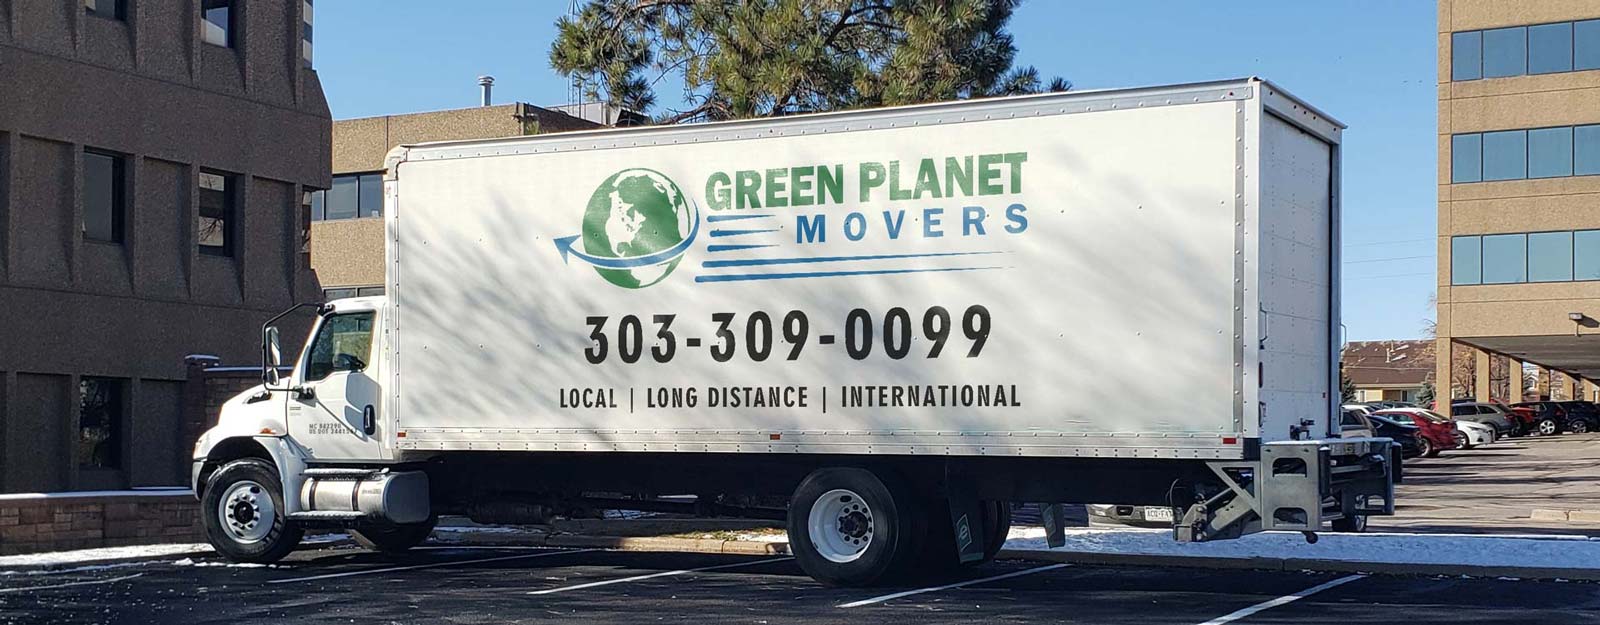 local moving company in denver